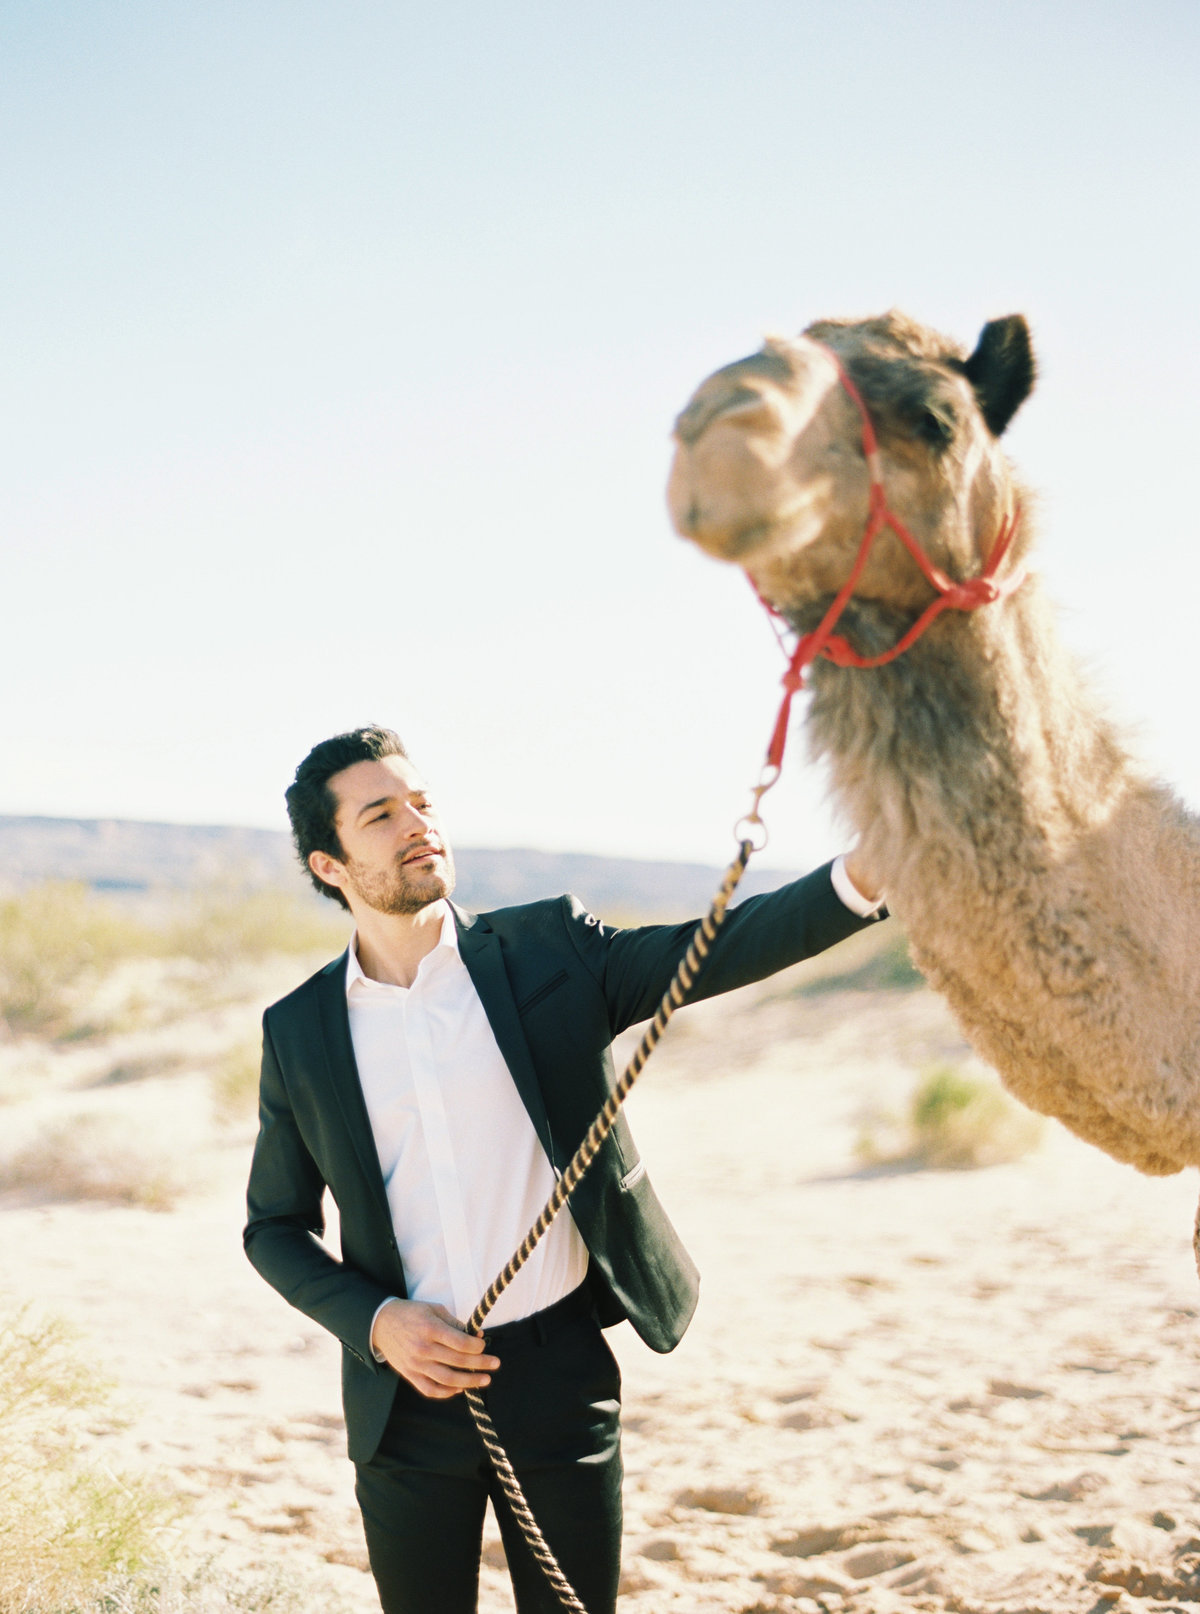 philip-casey-photography-desert-camel-editorial-session-08